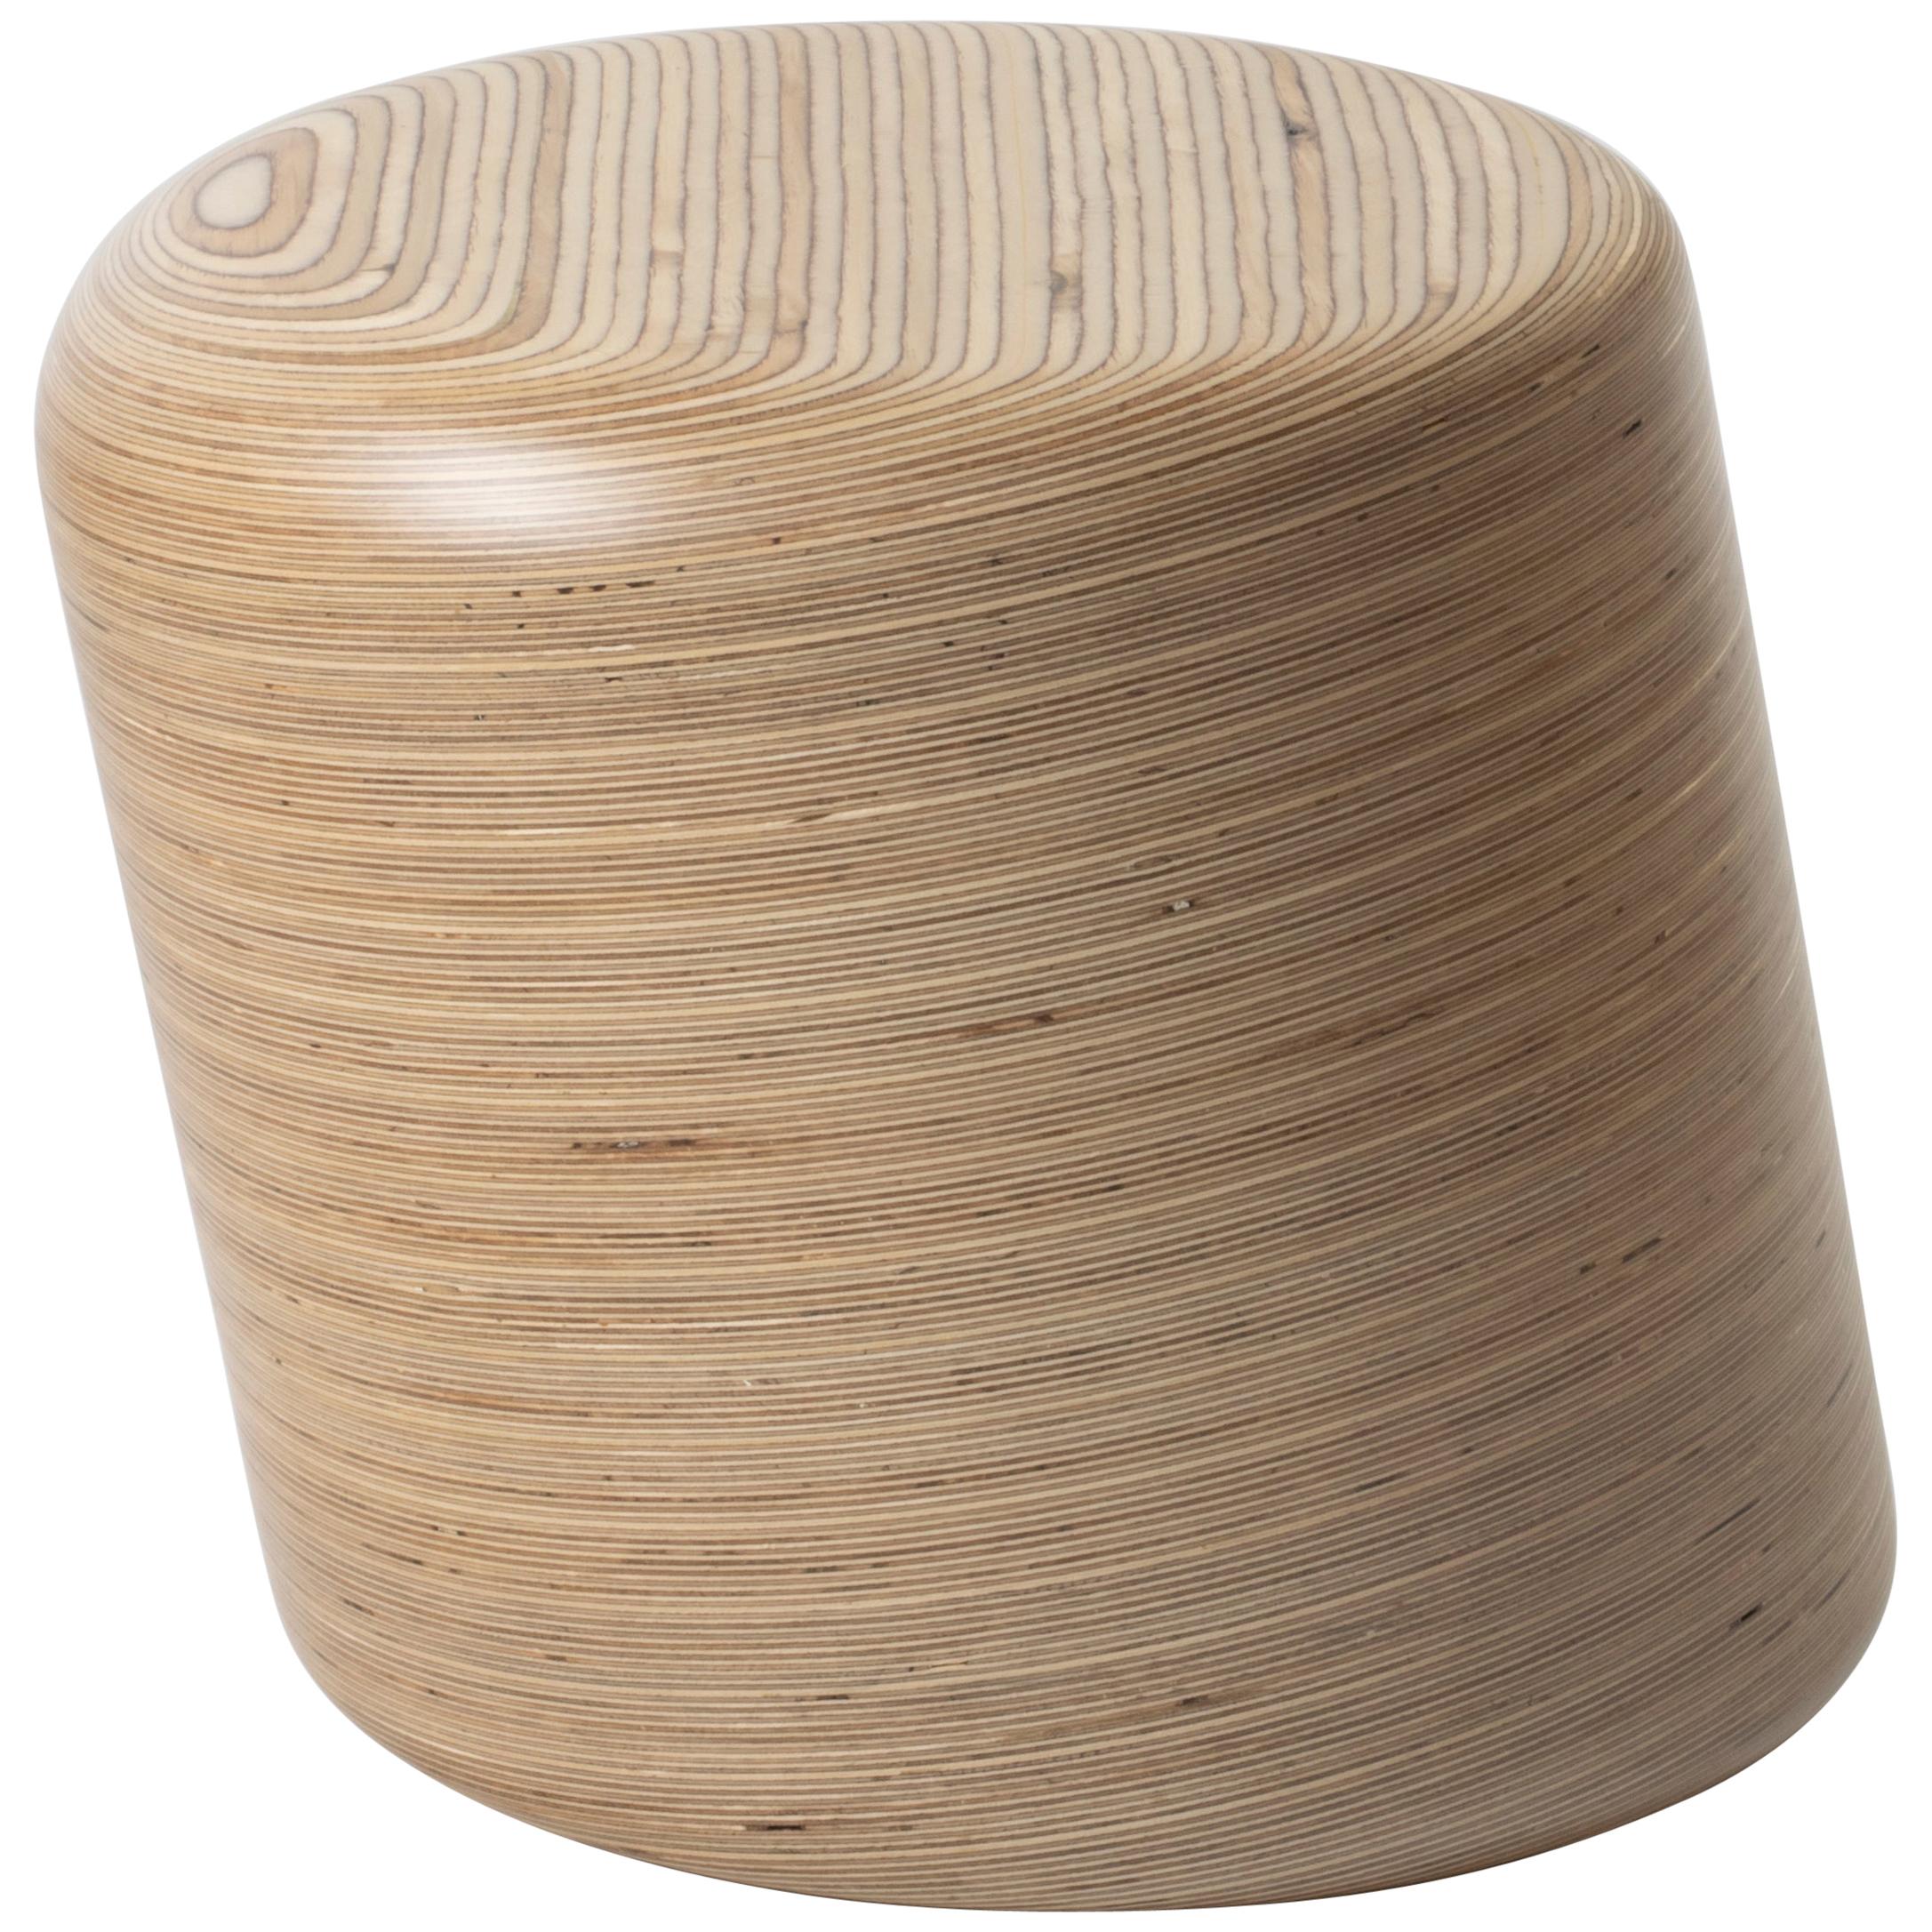 Stack Stool, Timbur, Represented by Tuleste Factory For Sale